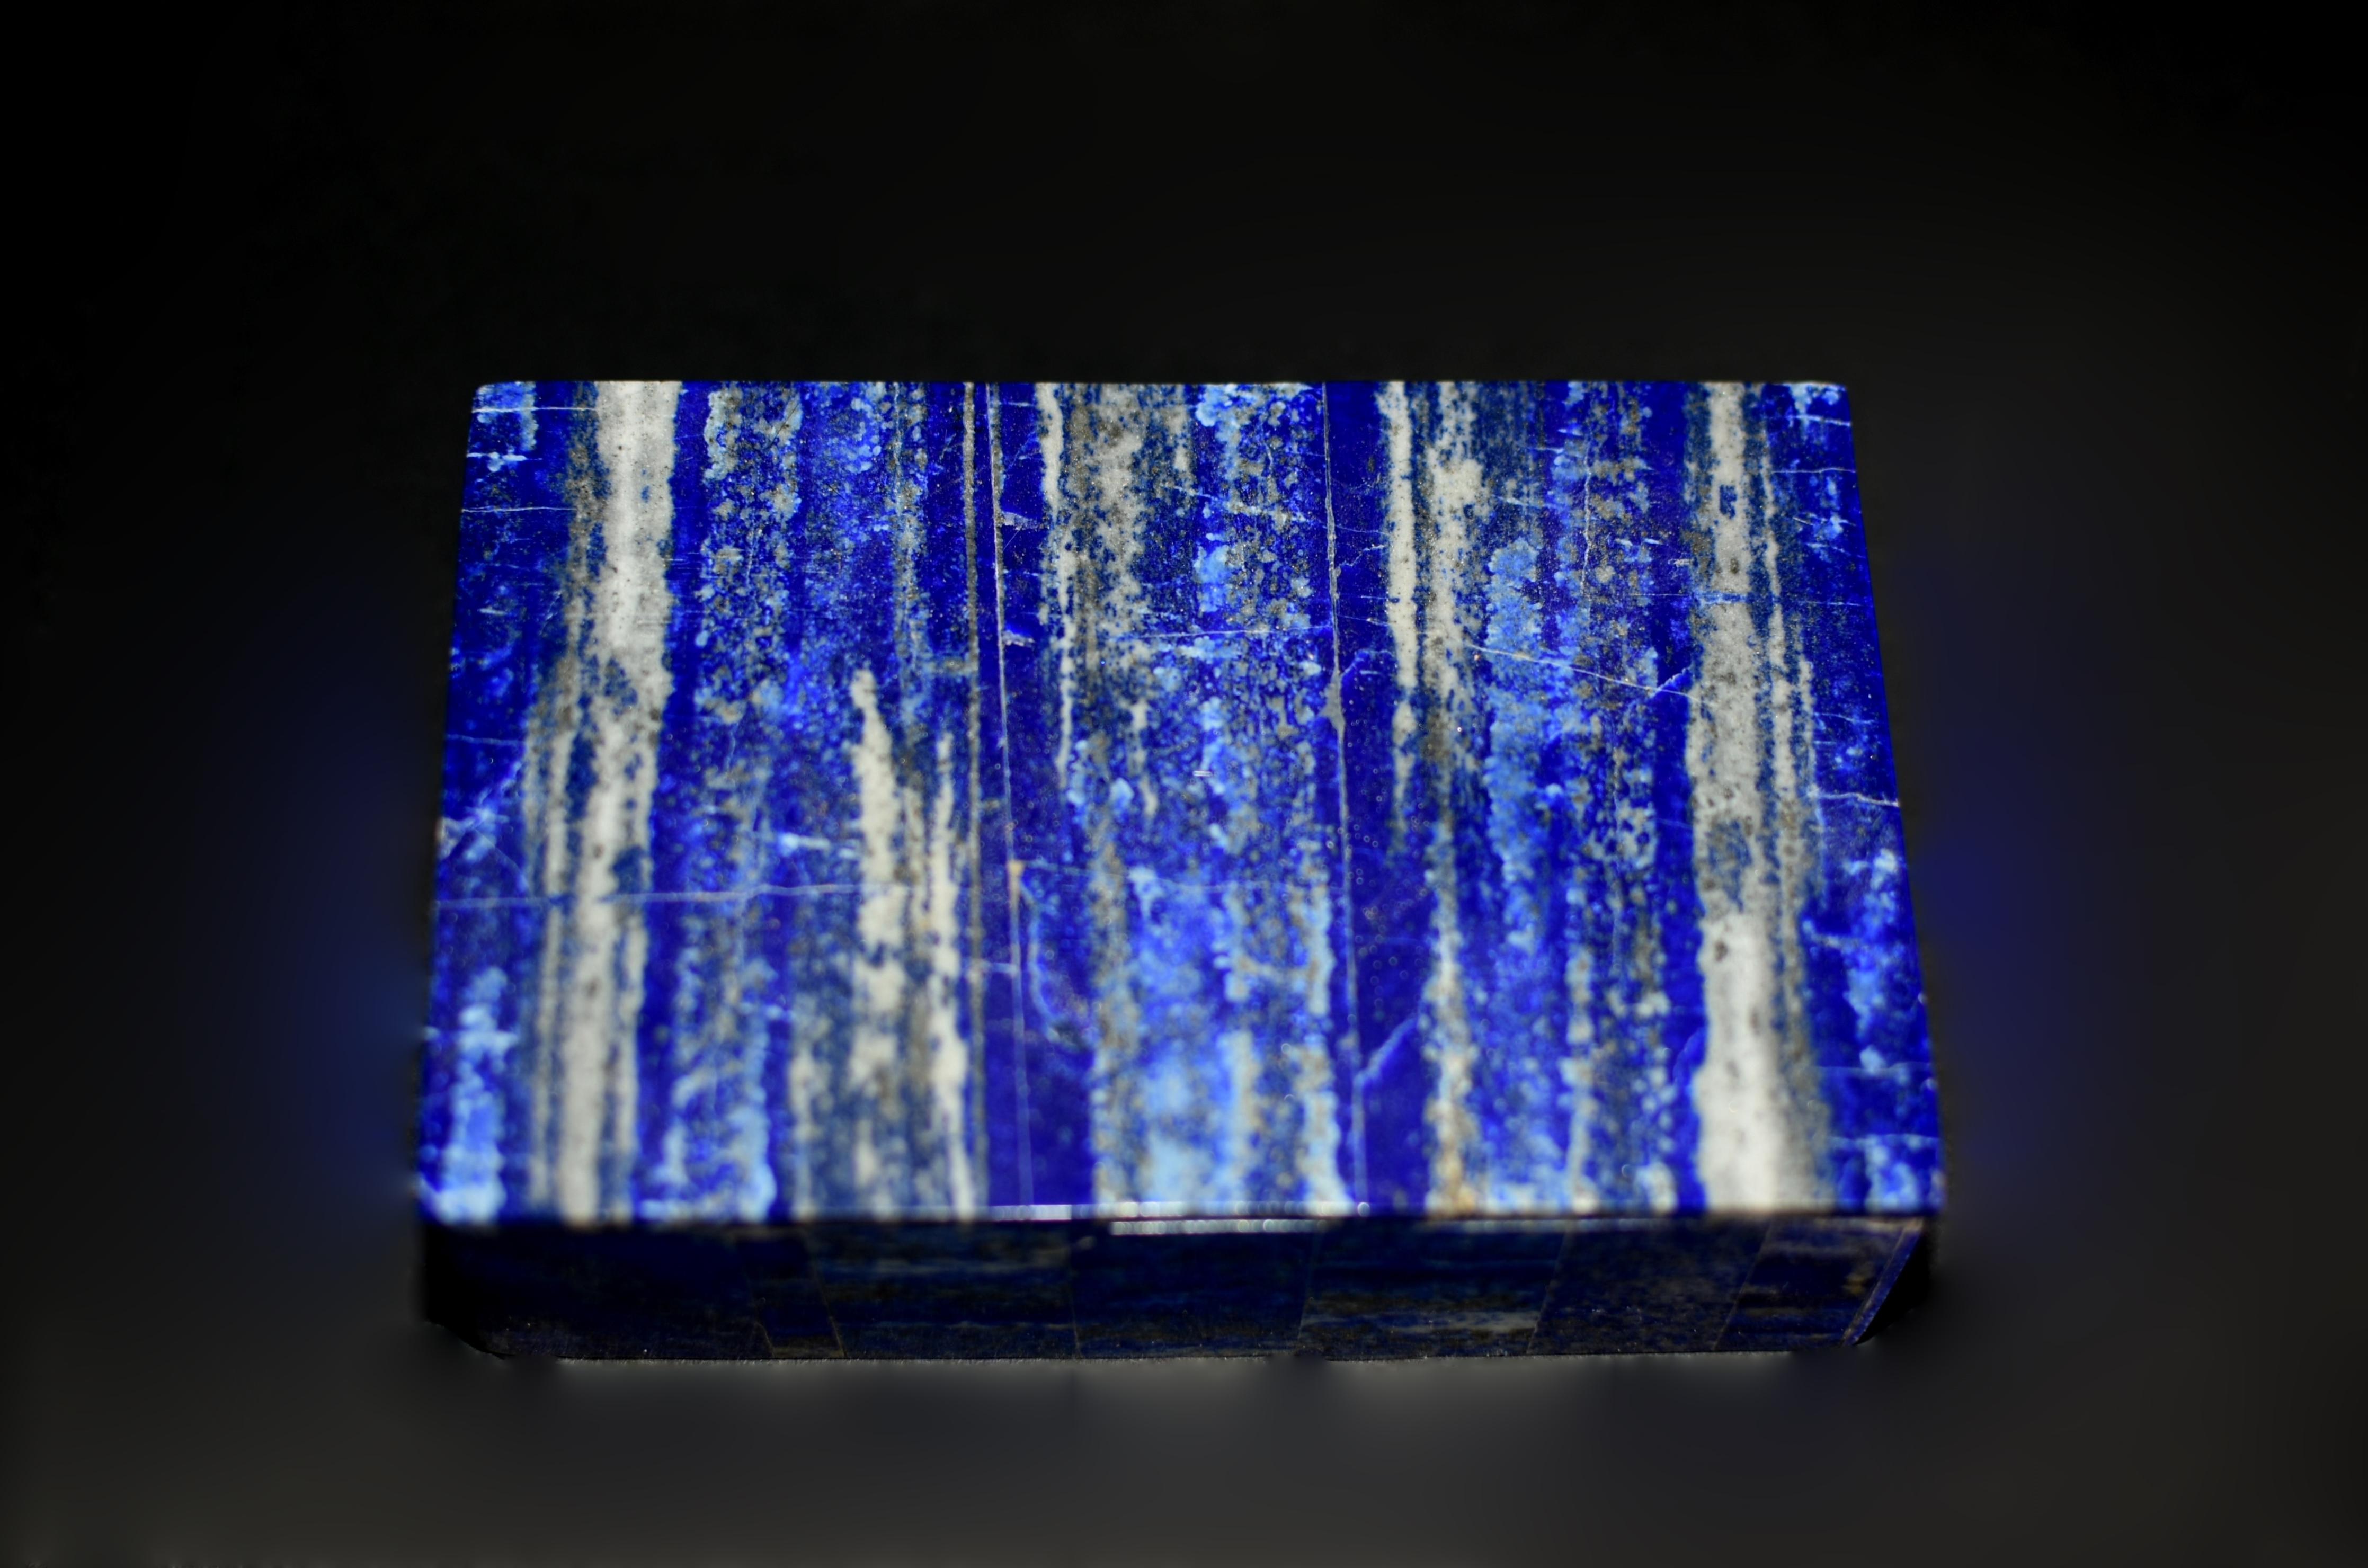 A pair of beautiful vintage natural lapis boxes. Crafted from the finest grade AAA natural lapis lazuli, these boxes use carefully selected pieces with matching stone patterns resembling a forest of beech trees against blue skies. Saturated cobalt